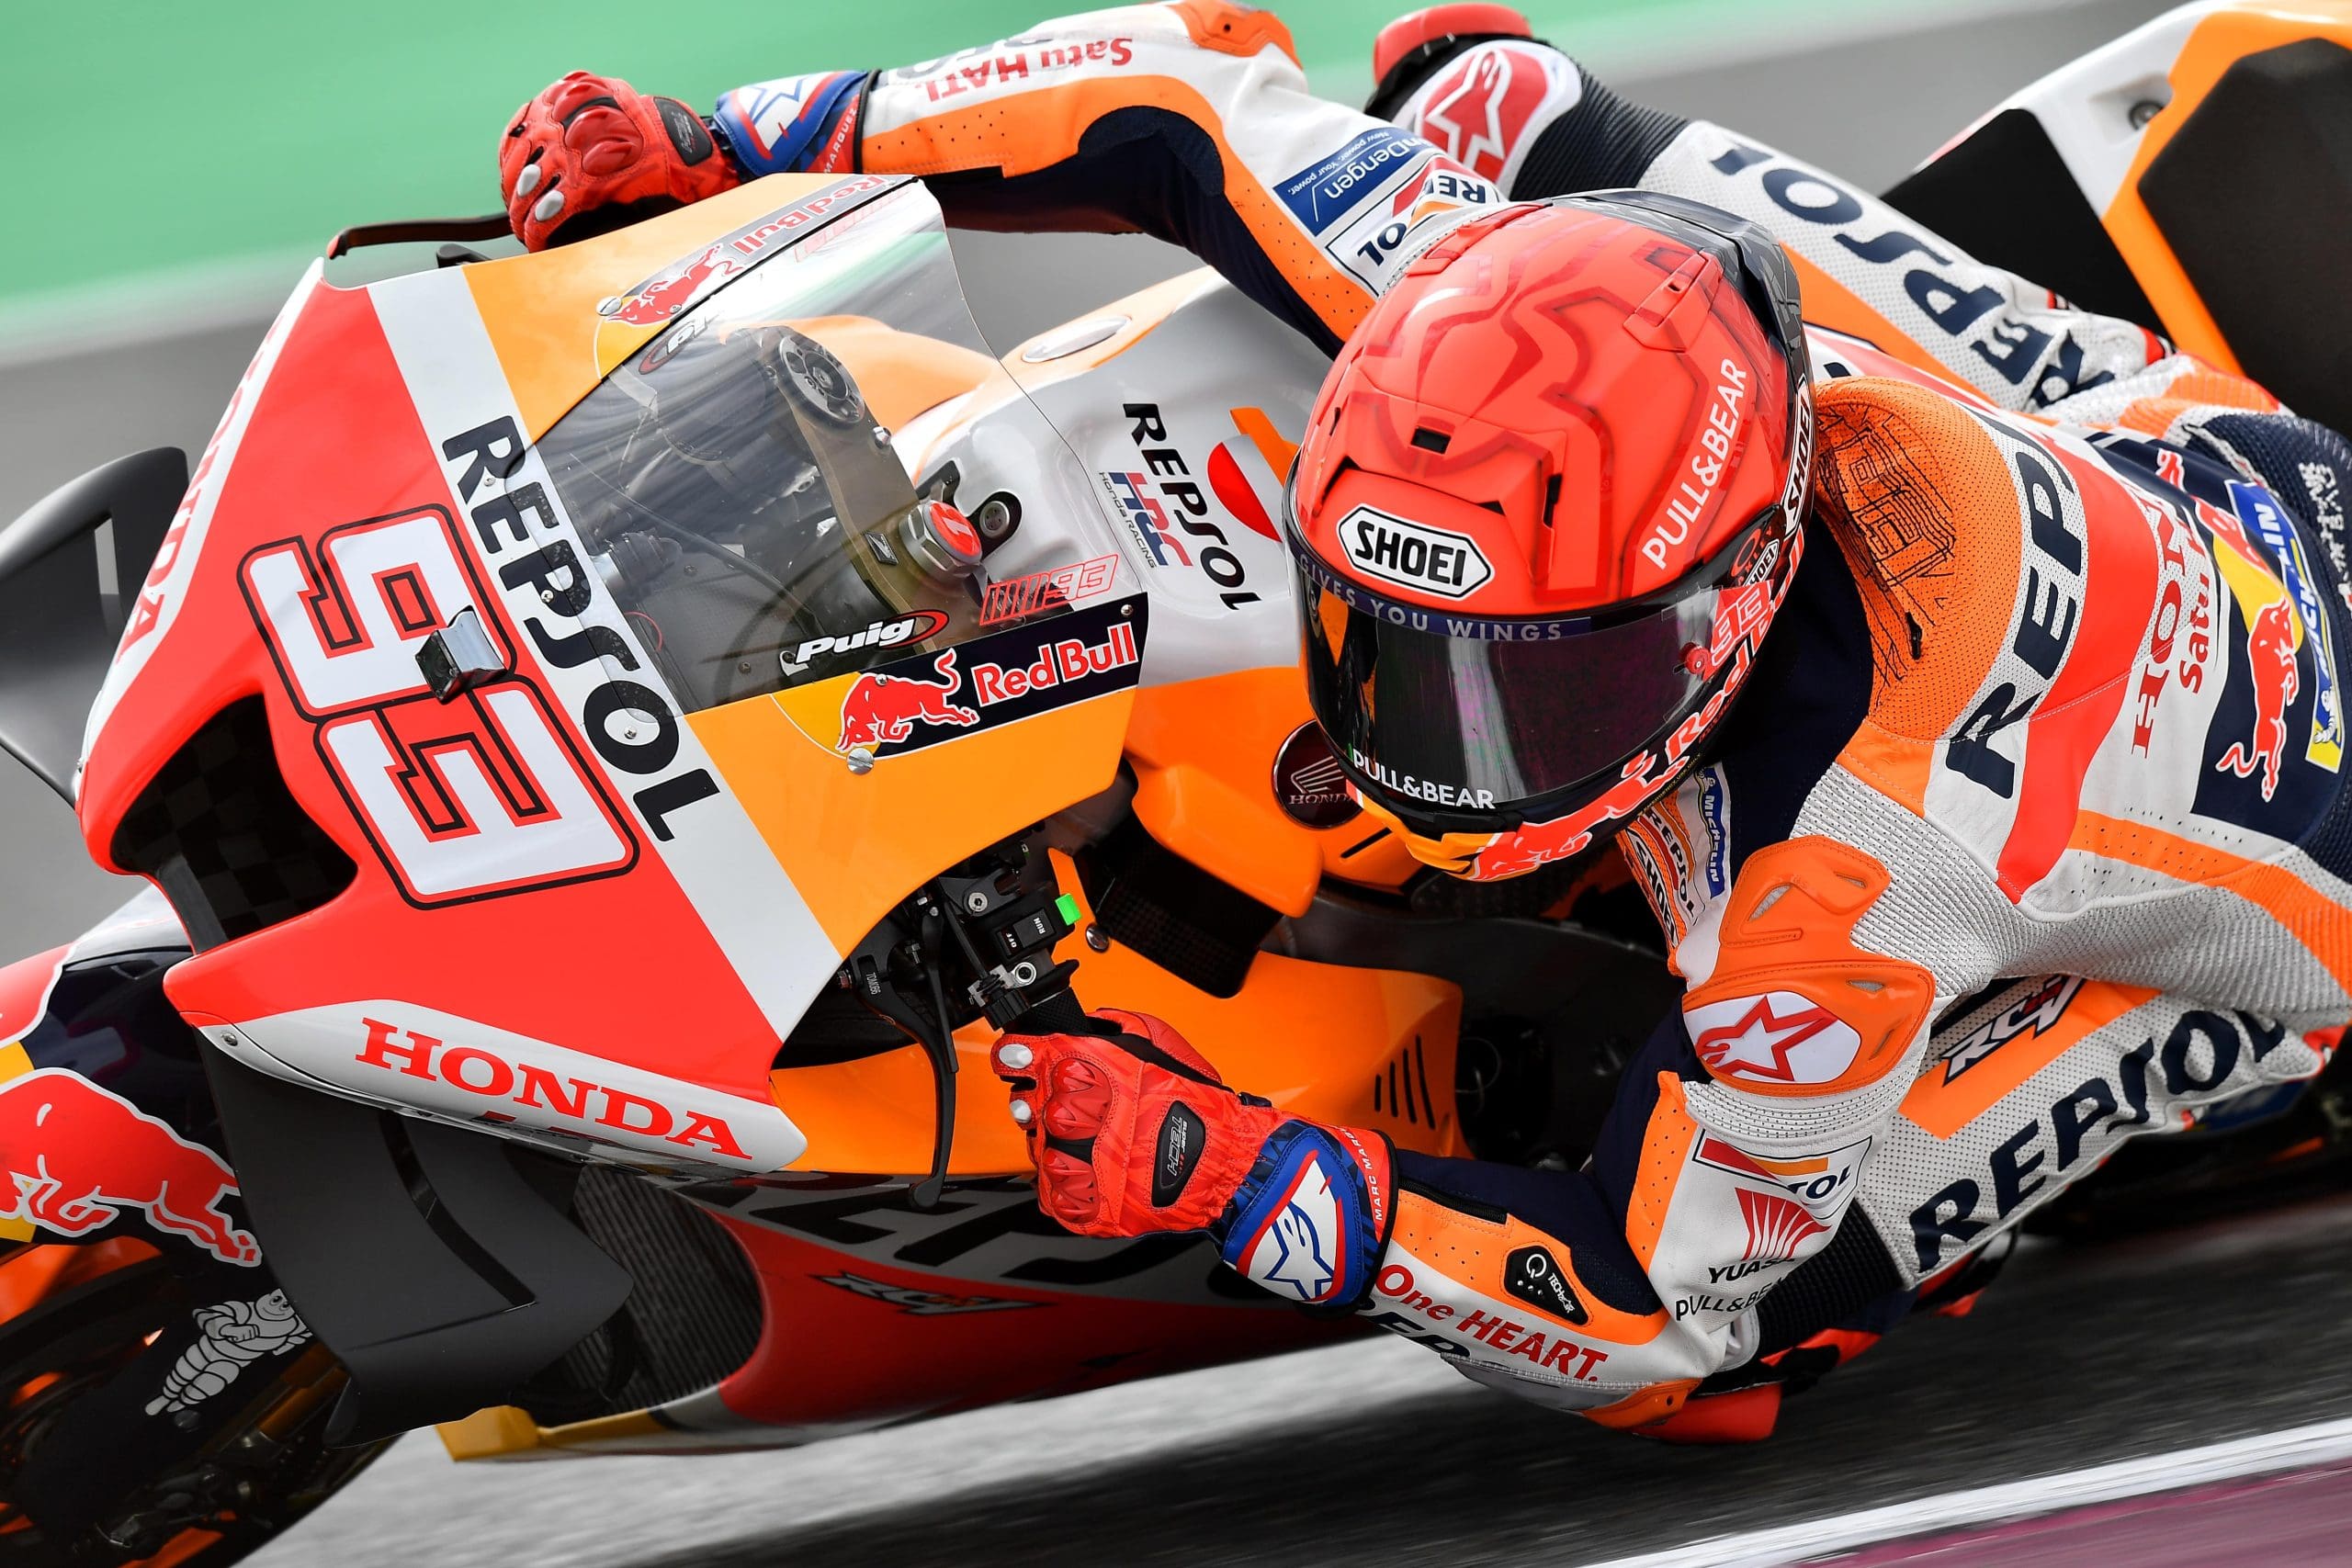 Marc Marquez leaned hard into a turn in a race.